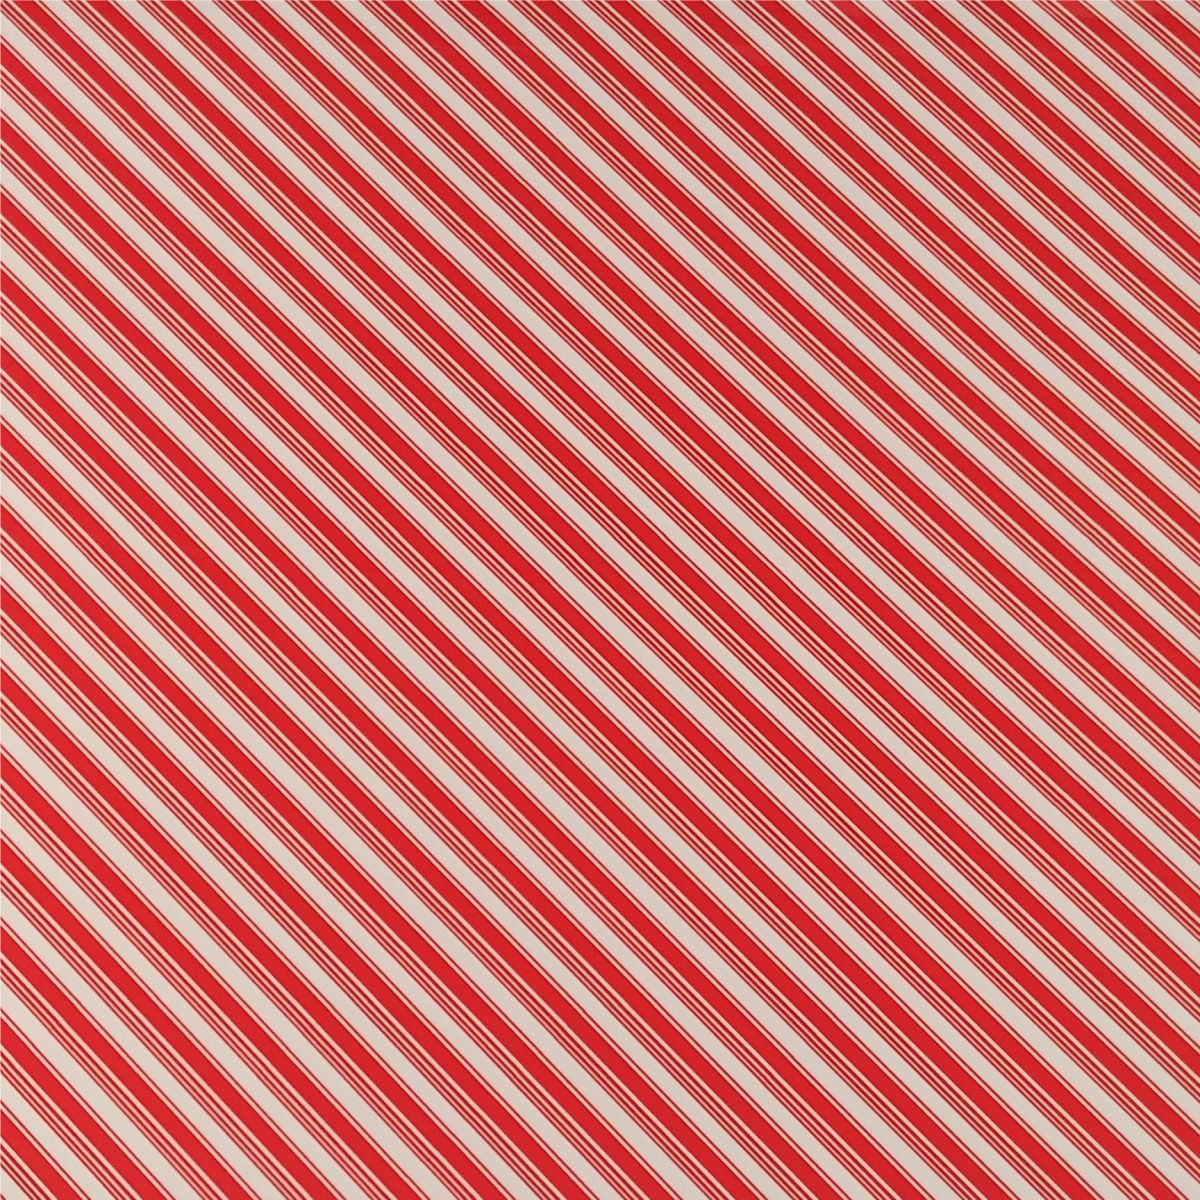 ThermoFlex® HTV Fashion Patterns 12x15 Sheets-Candy Cane - CraftCutterSupply.com